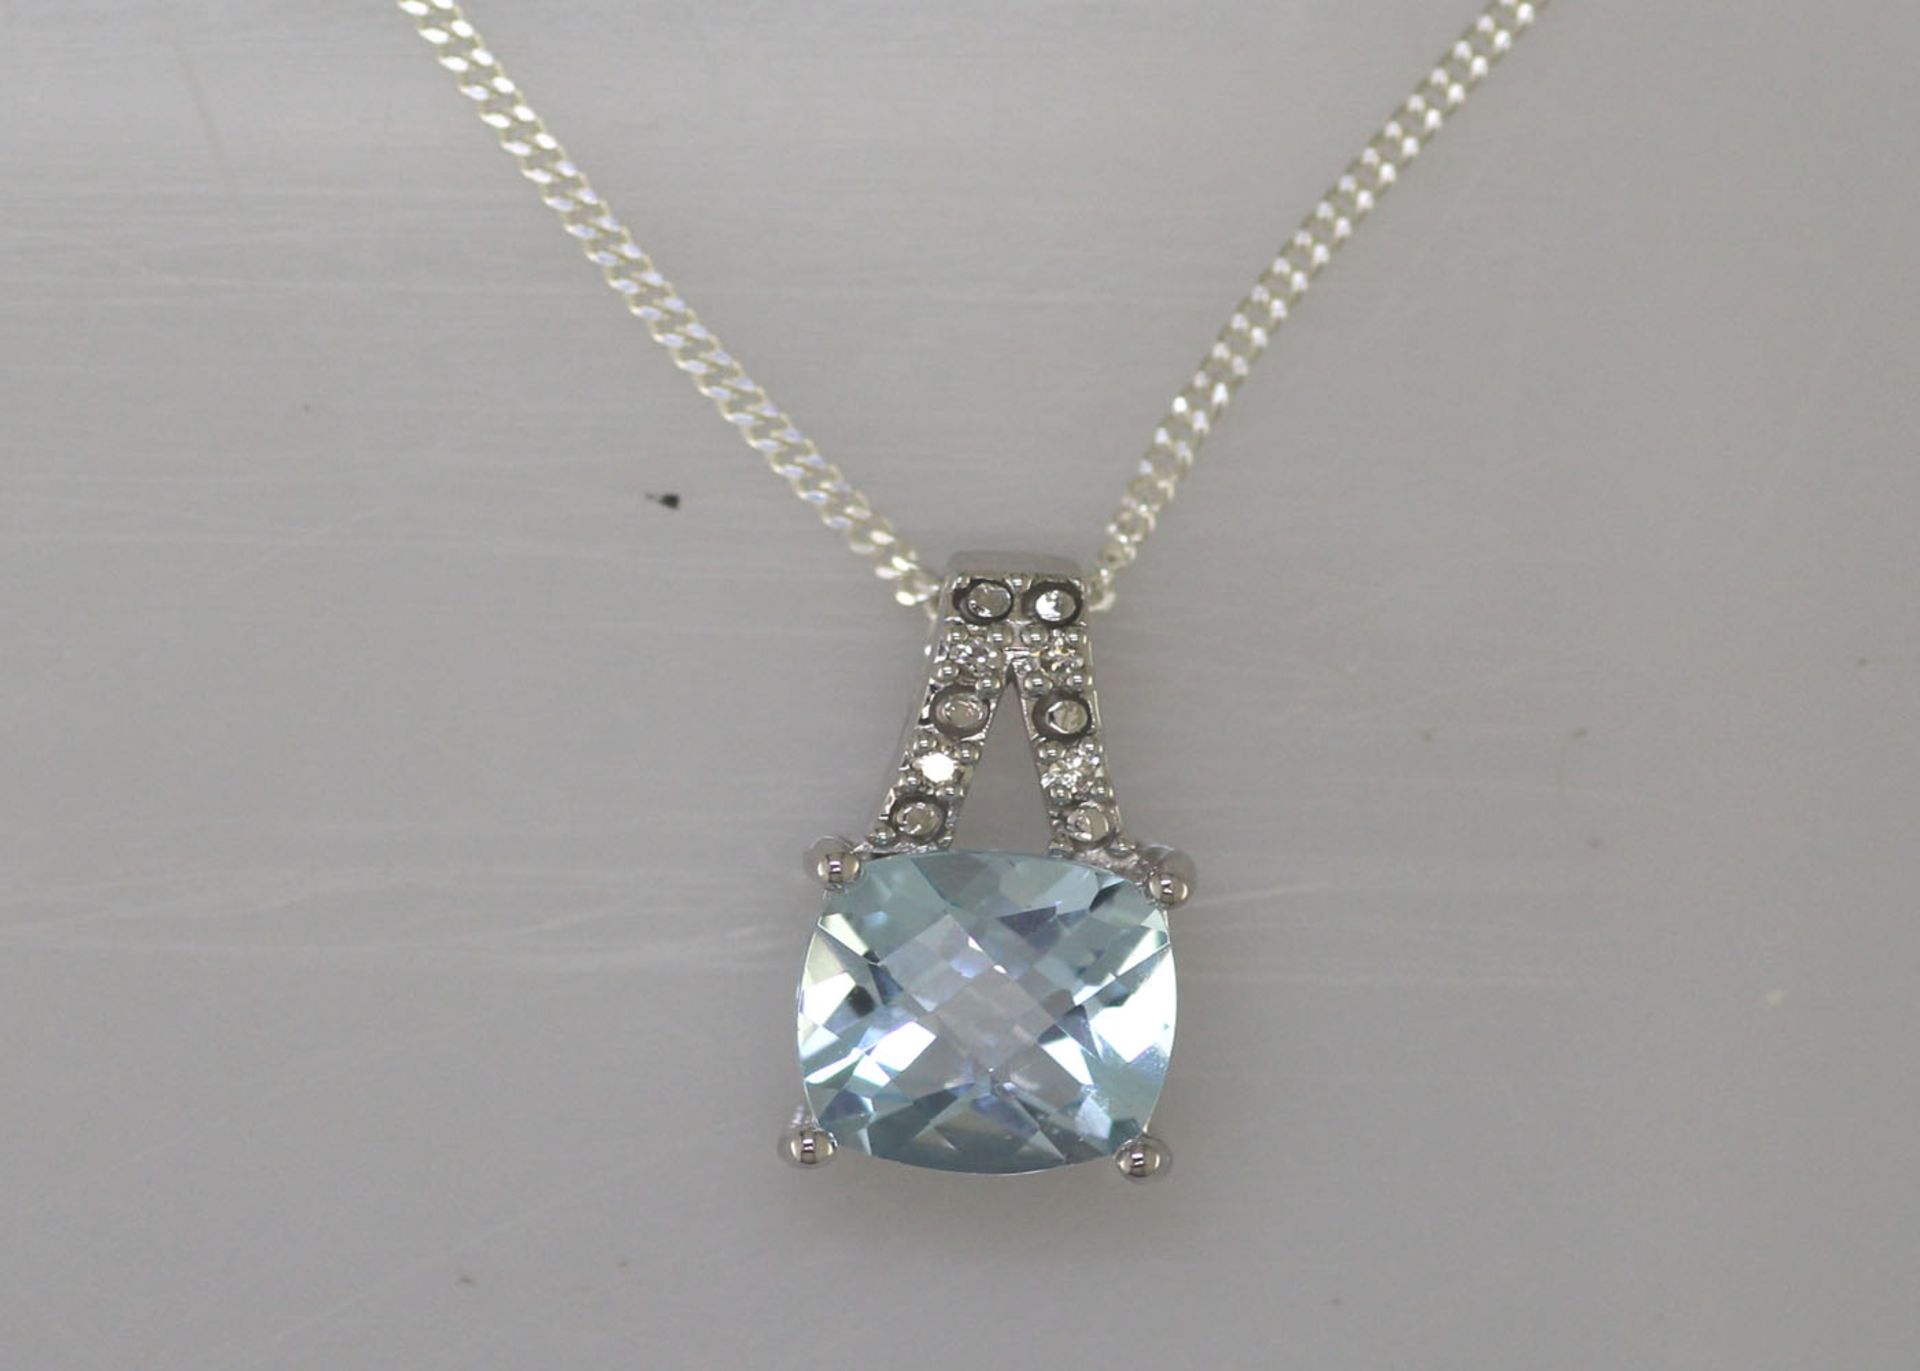 9ct White Gold Diamond And Blue Topaz Pendant 0.05 Carats - Valued by GIE £1,470.00 - A stunning 3. - Image 5 of 6